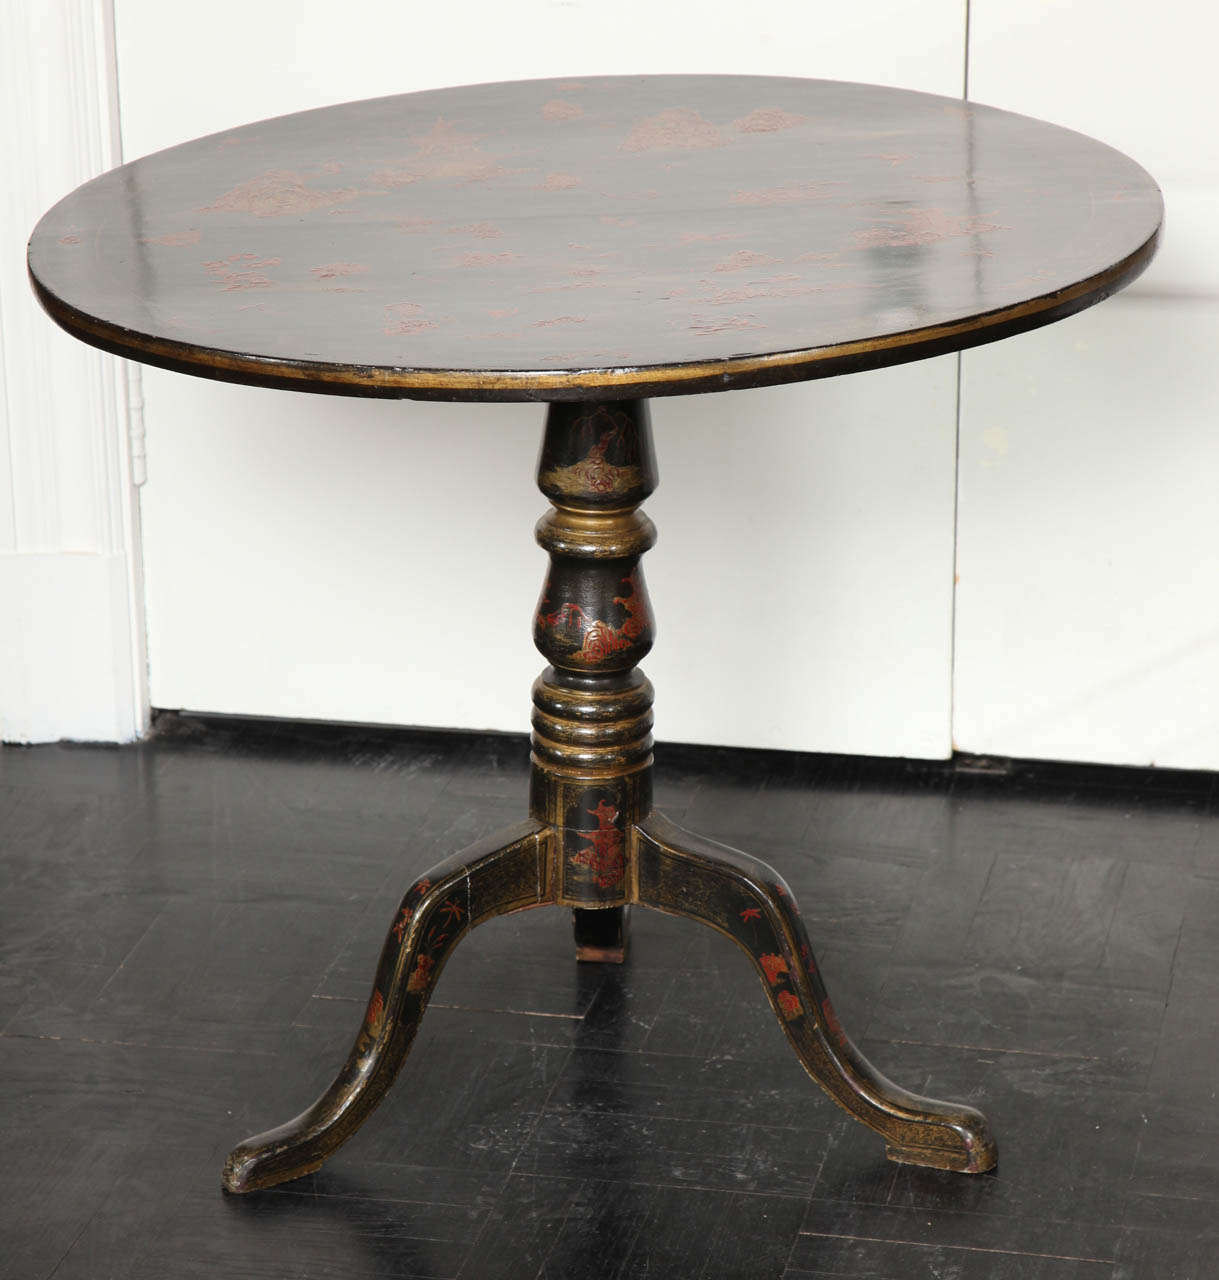 Mid-19th Century Chinese Export black chinoiserie tilt top center table with gilded pagodas, landscape, and figures, column tri-pod base similarly decorated